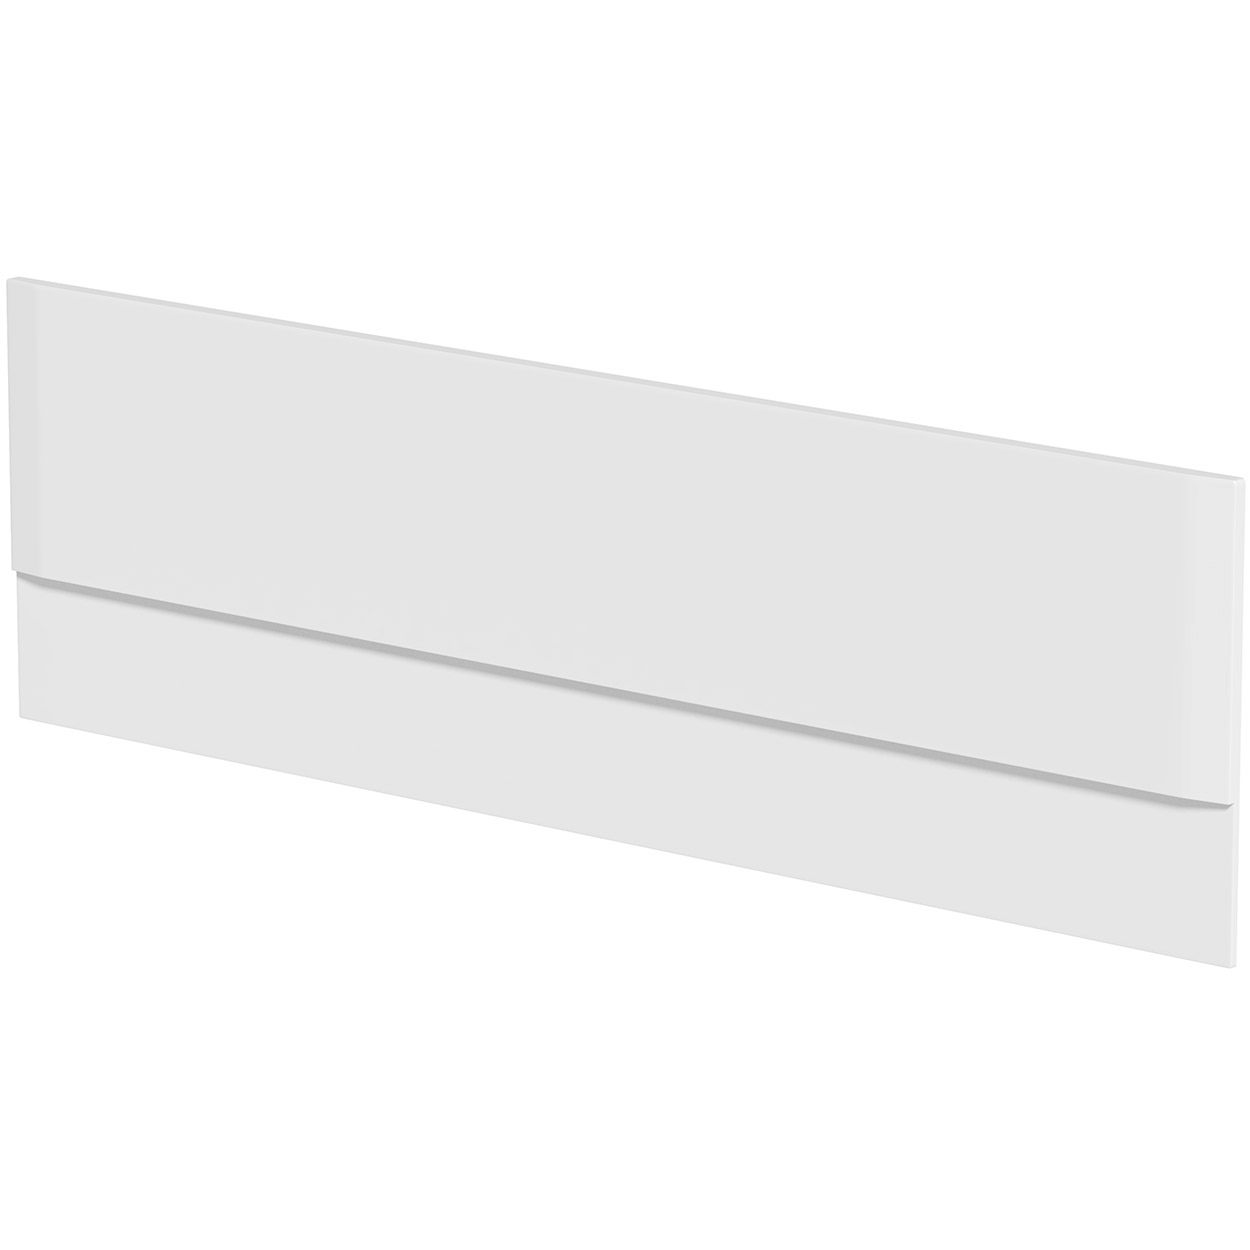 Orchard reinforced straight bath front panel 1800mm